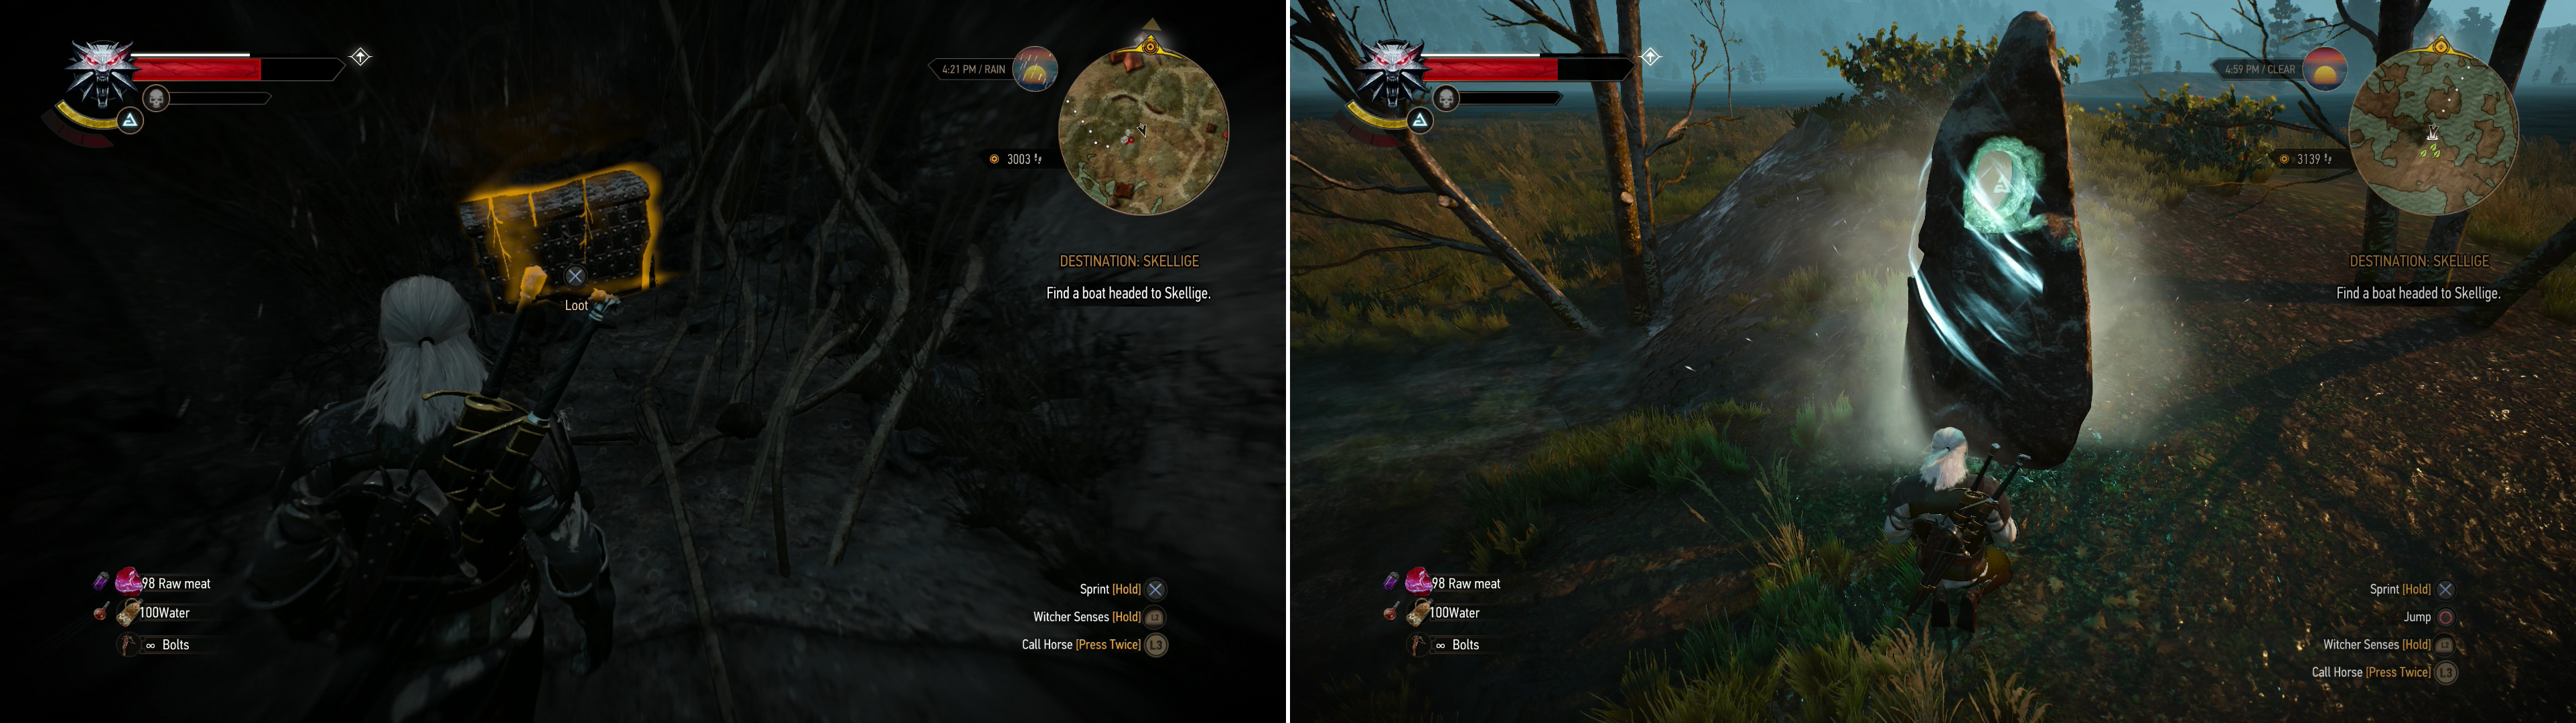 Use Aard to blast your way into a cave, where you’ll find the Diagram: Enhanced Griffin Gauntlets in a chest (left). South of Frischlow you’ll find a Place of Power (right).